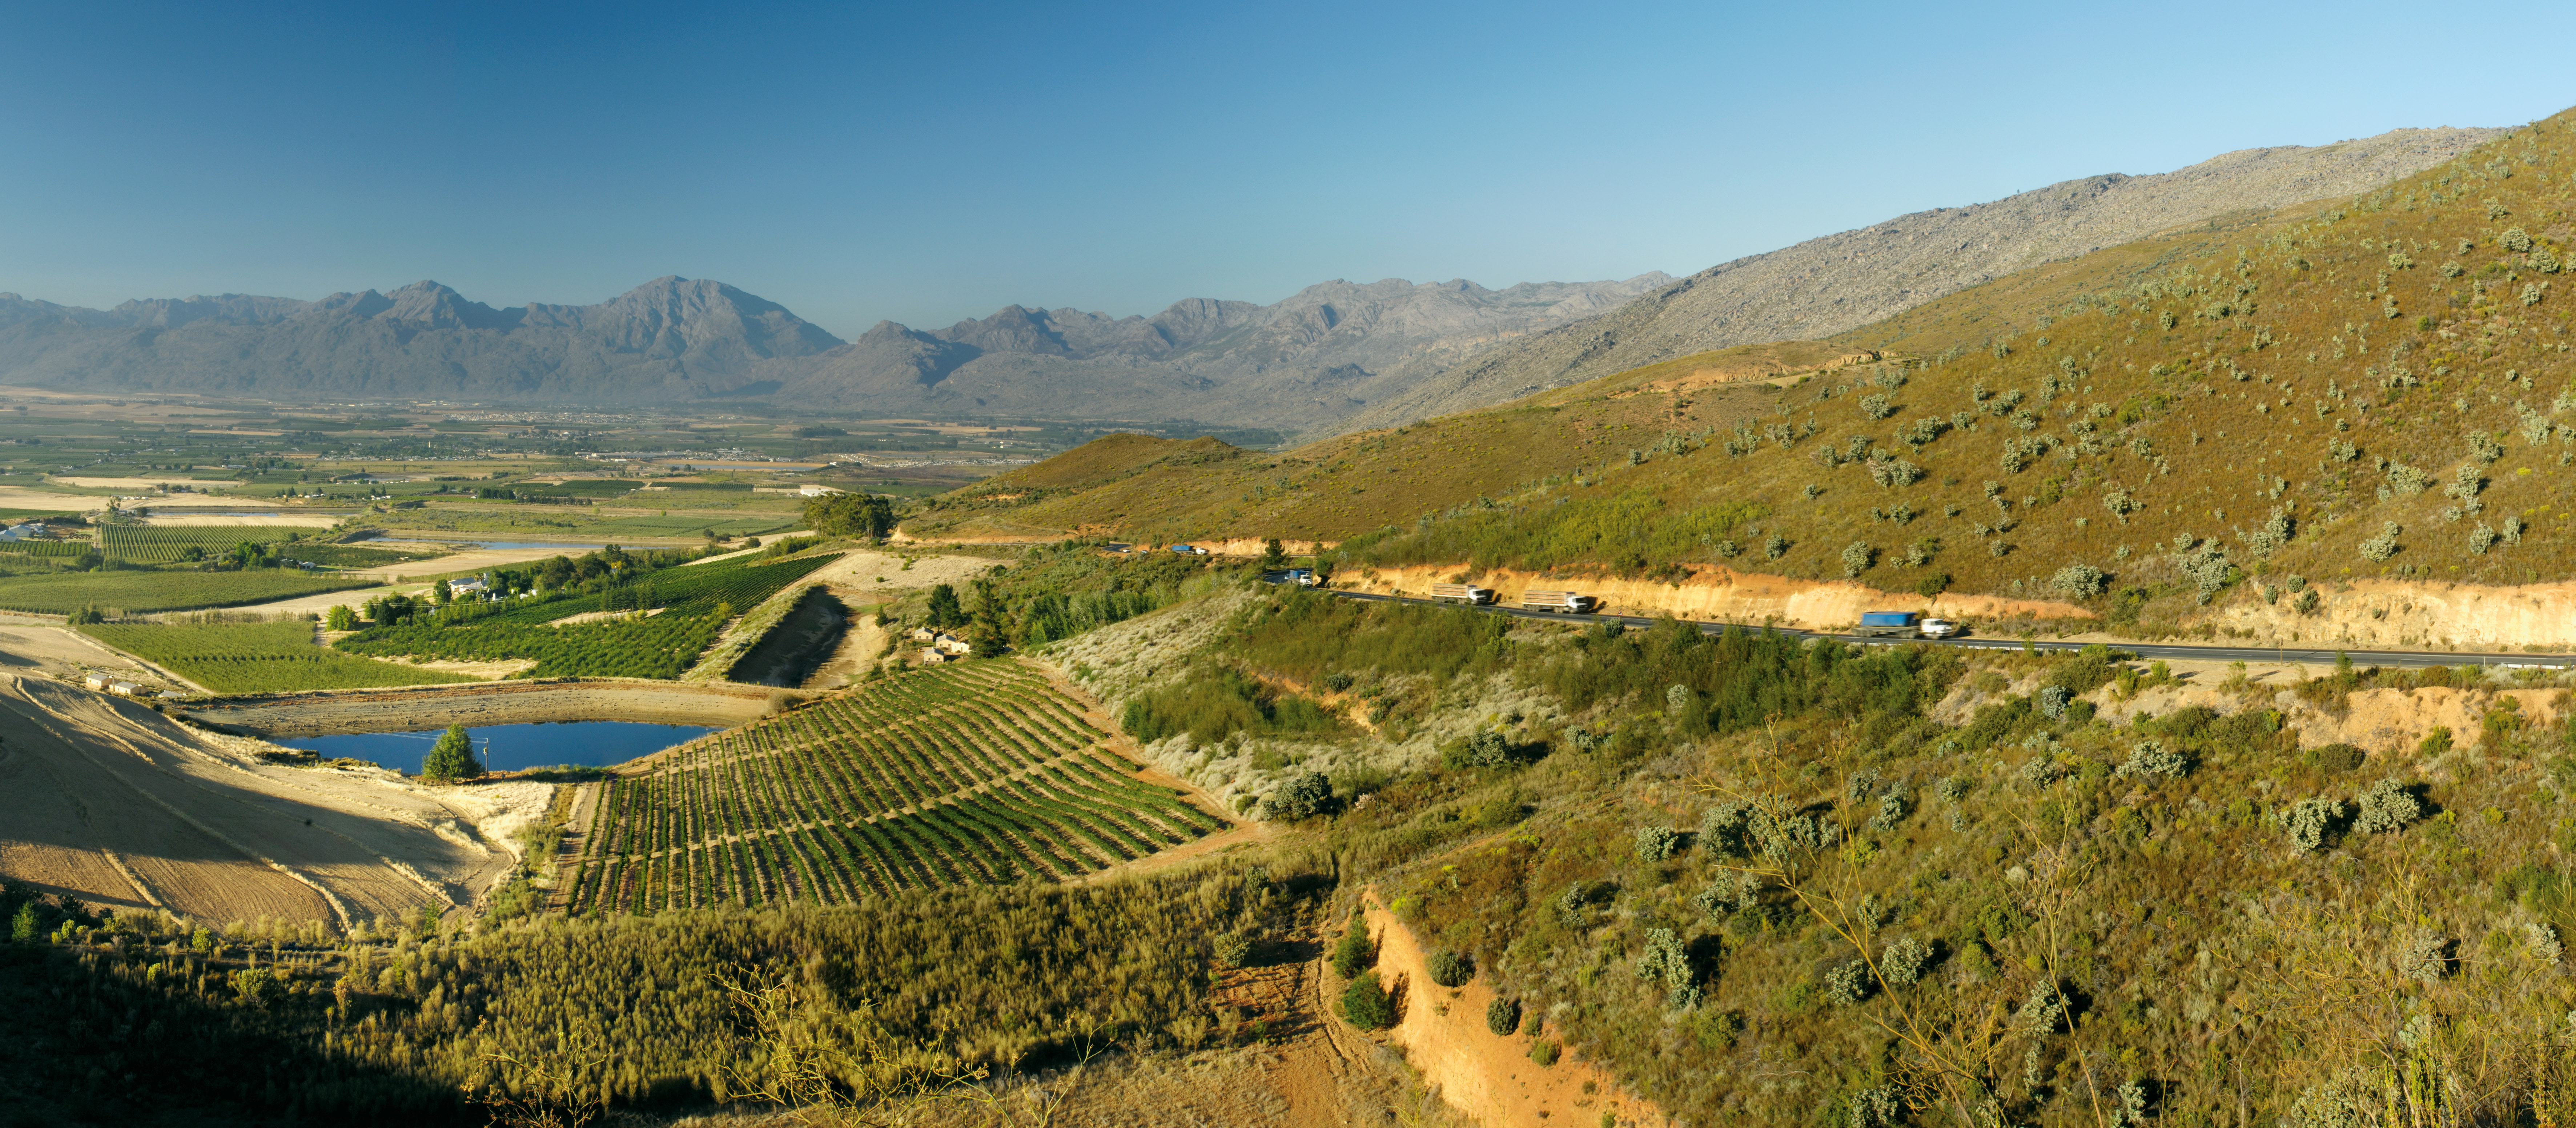 SOUTH AFRICA - May 2011: A scenic view of the Gydo pass. Feature text available. (Photo by Gallo Images/GO!/Ruvan Boshoff)